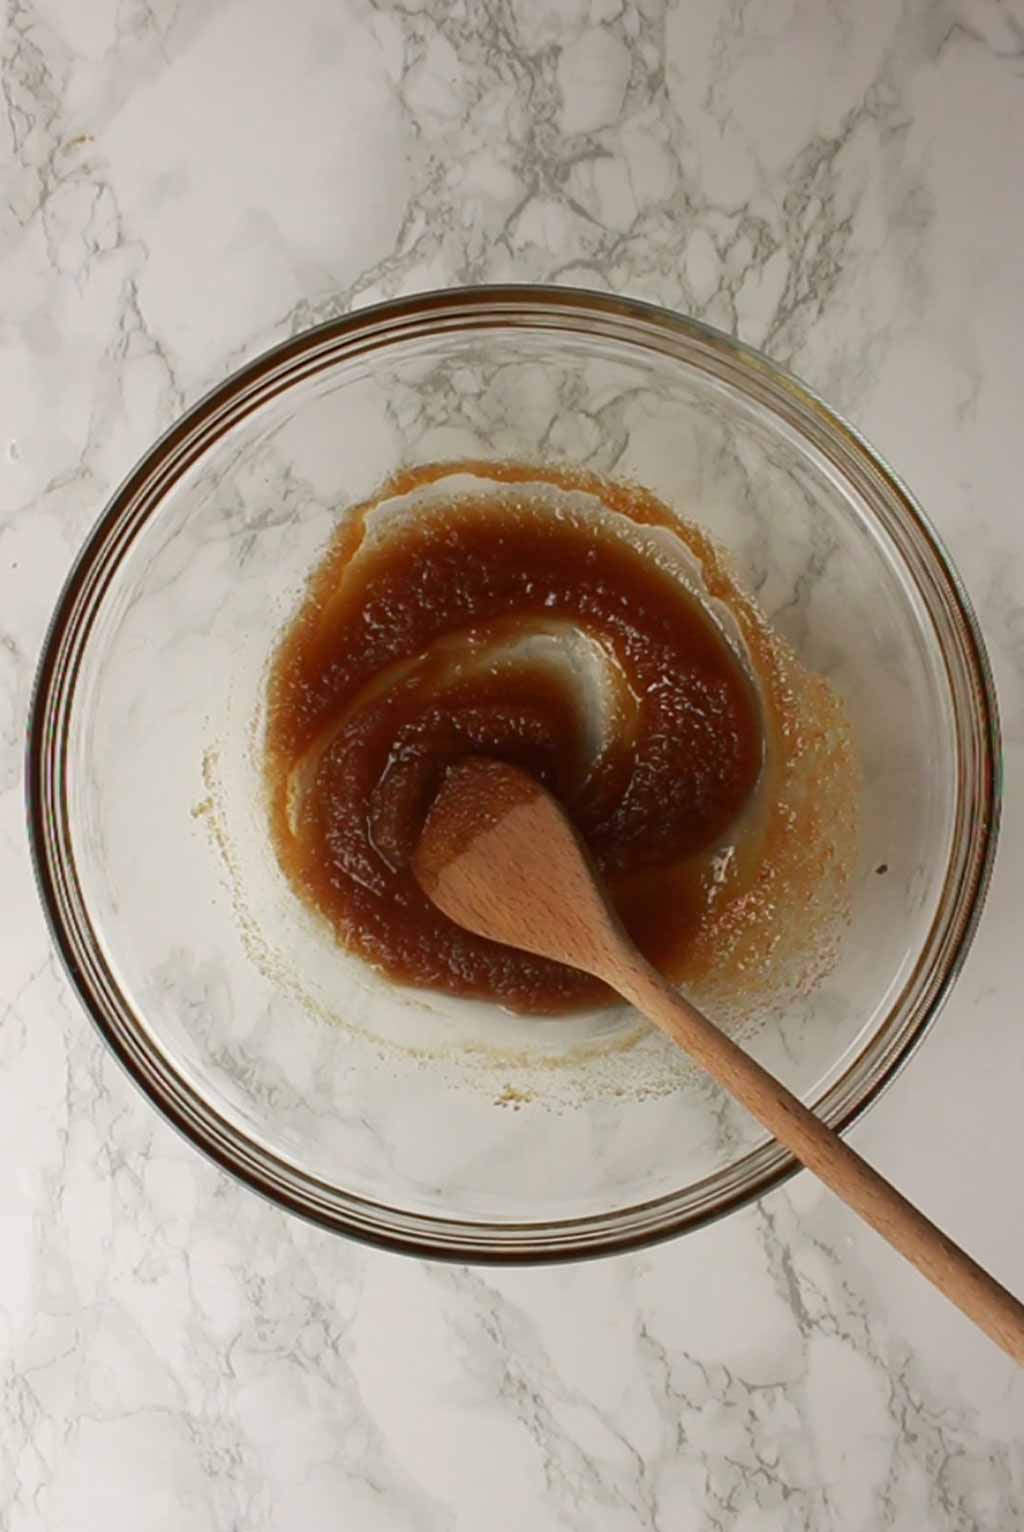 Sugar And Oil Mixture In A Bowl